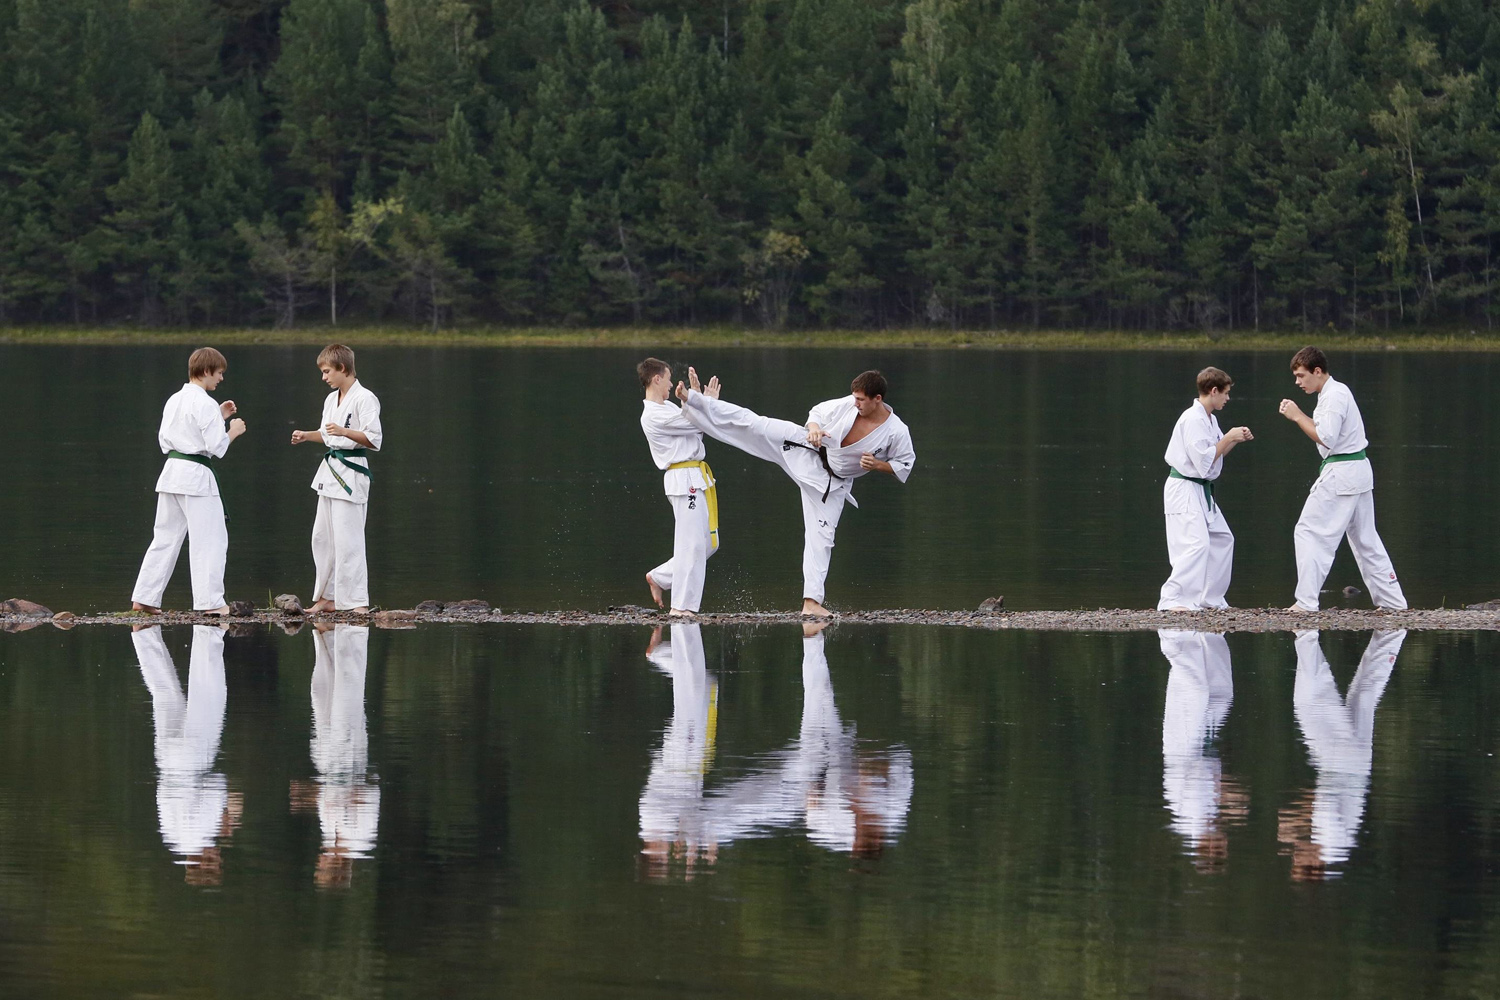 Young members of a local Kyokushin Karate federation perform during an exercise session at a summer training camp on a bank of the Yenisei River near the town of Divnogorsk, Siberia, Aug. 26, 2014.